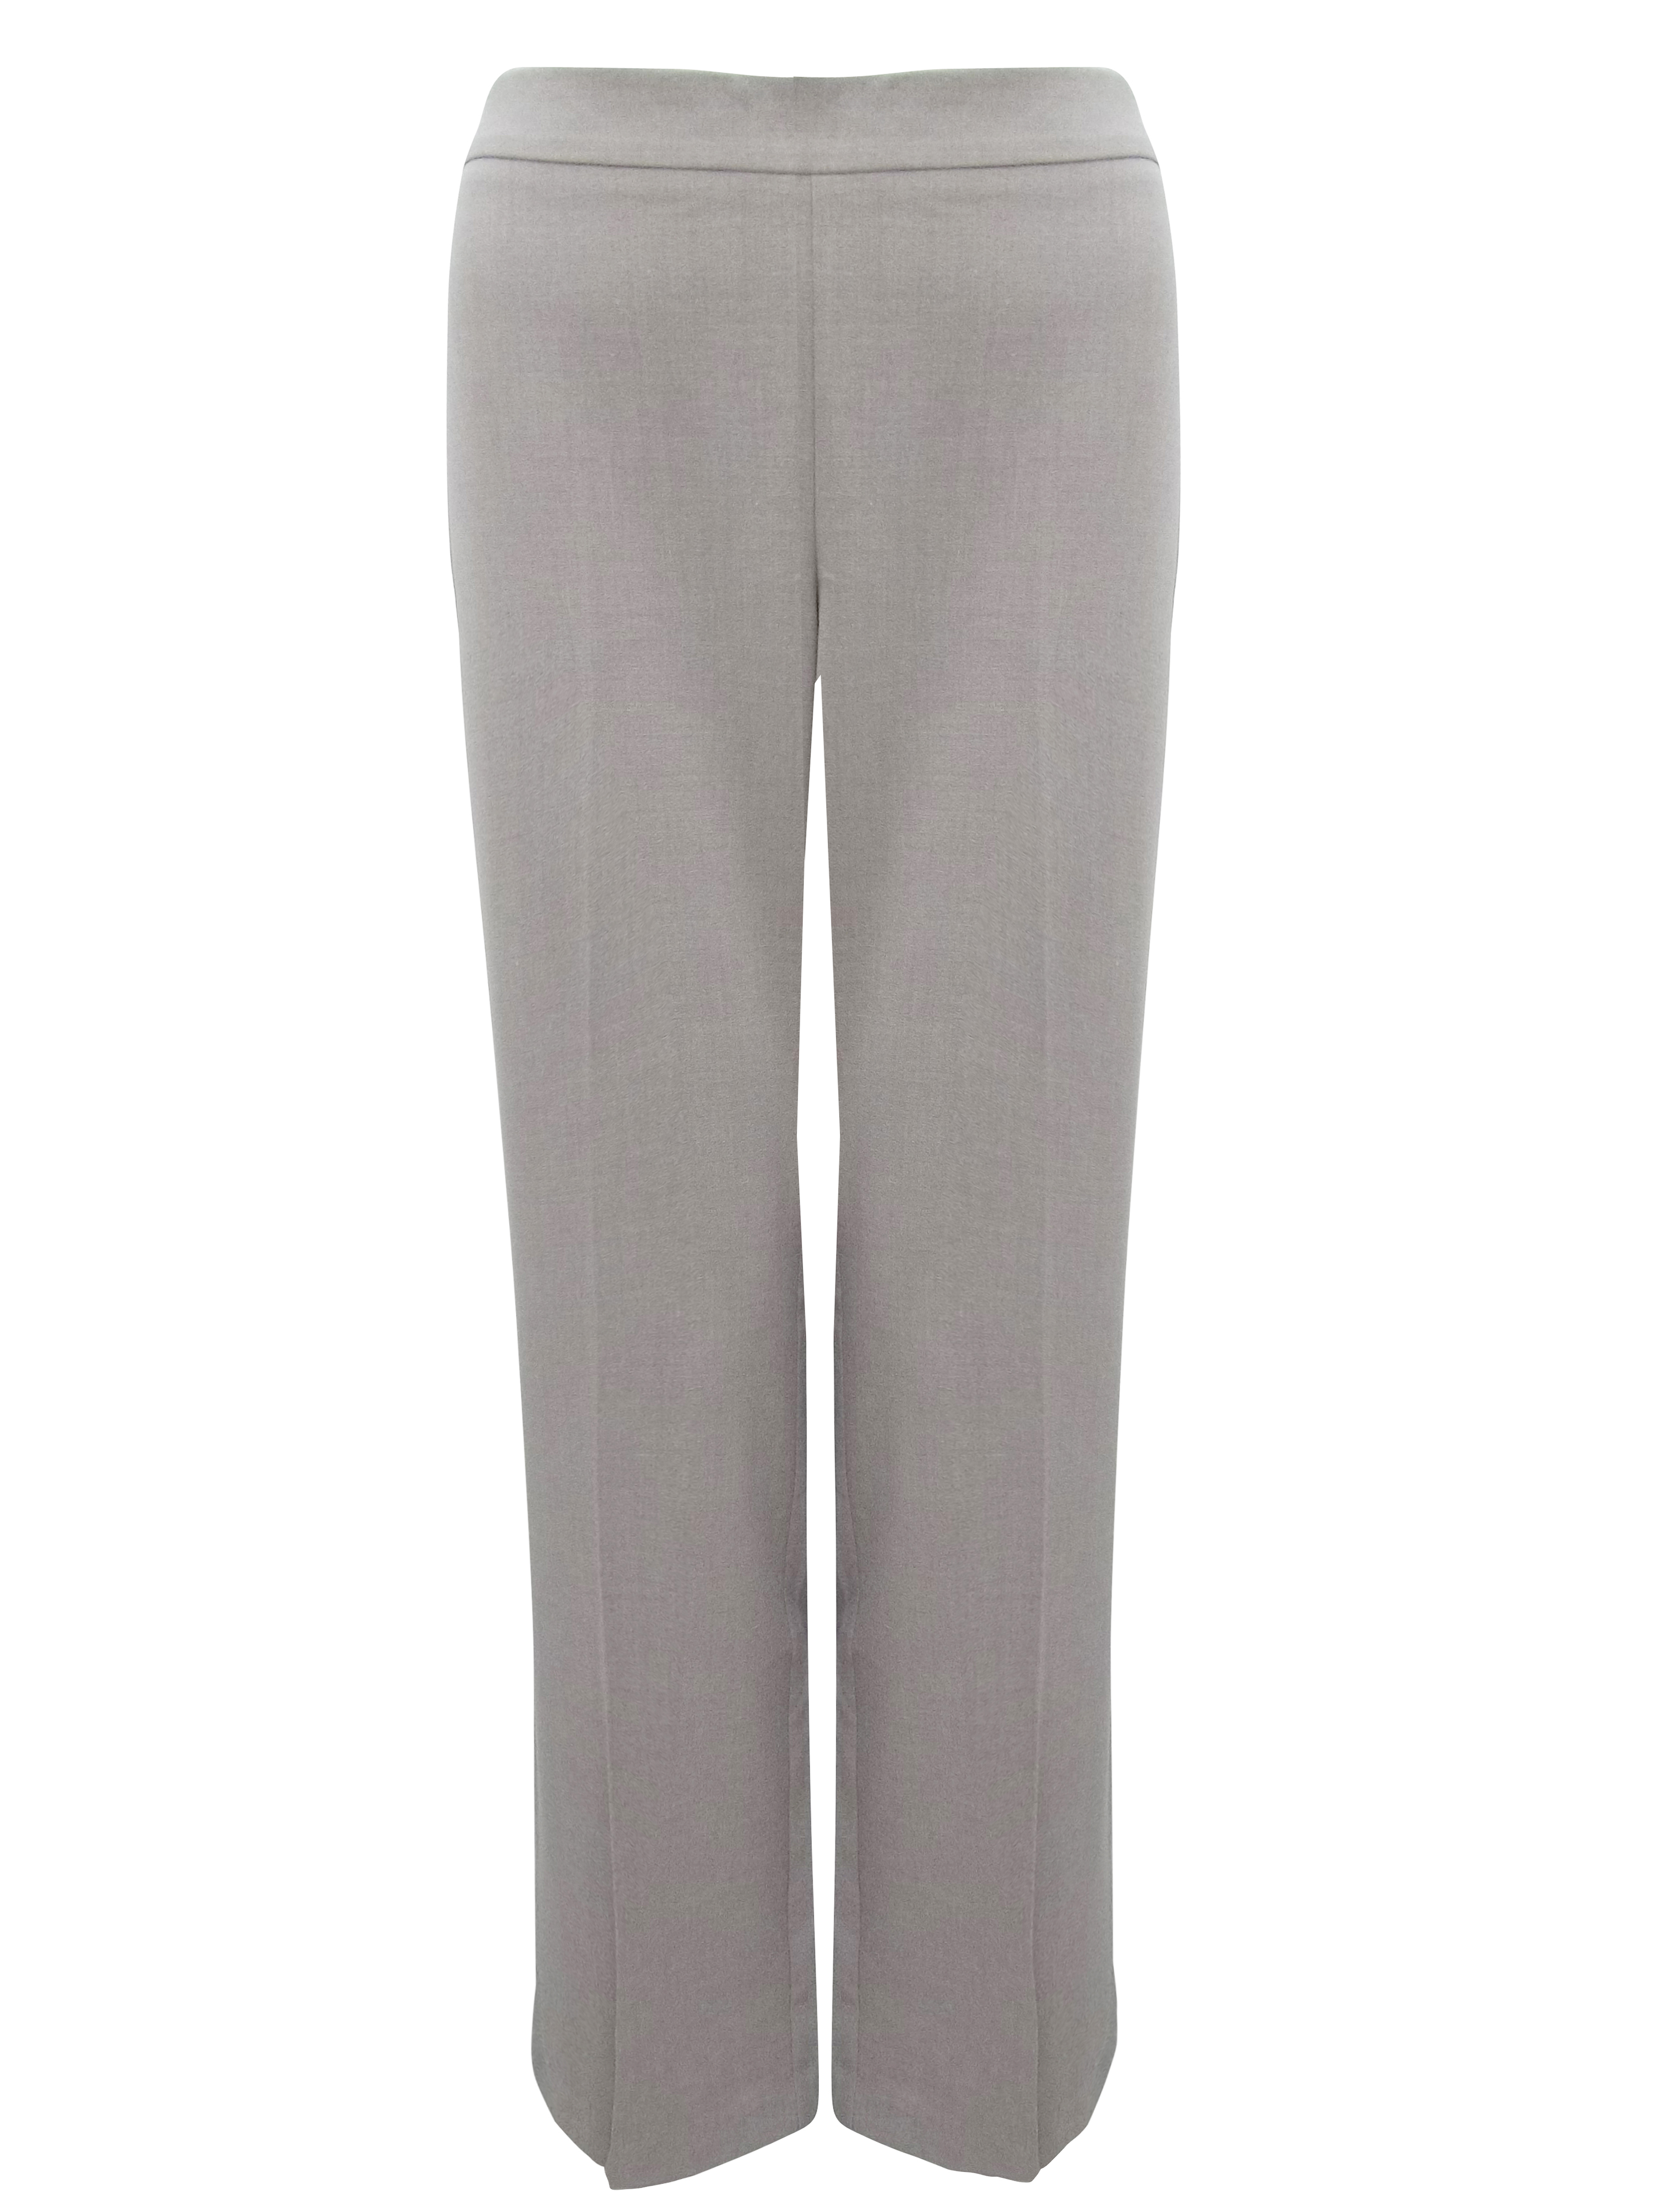 Marks and Spencer - - M&5 TAUPE Side Zip Slim Leg Trousers - Size 12